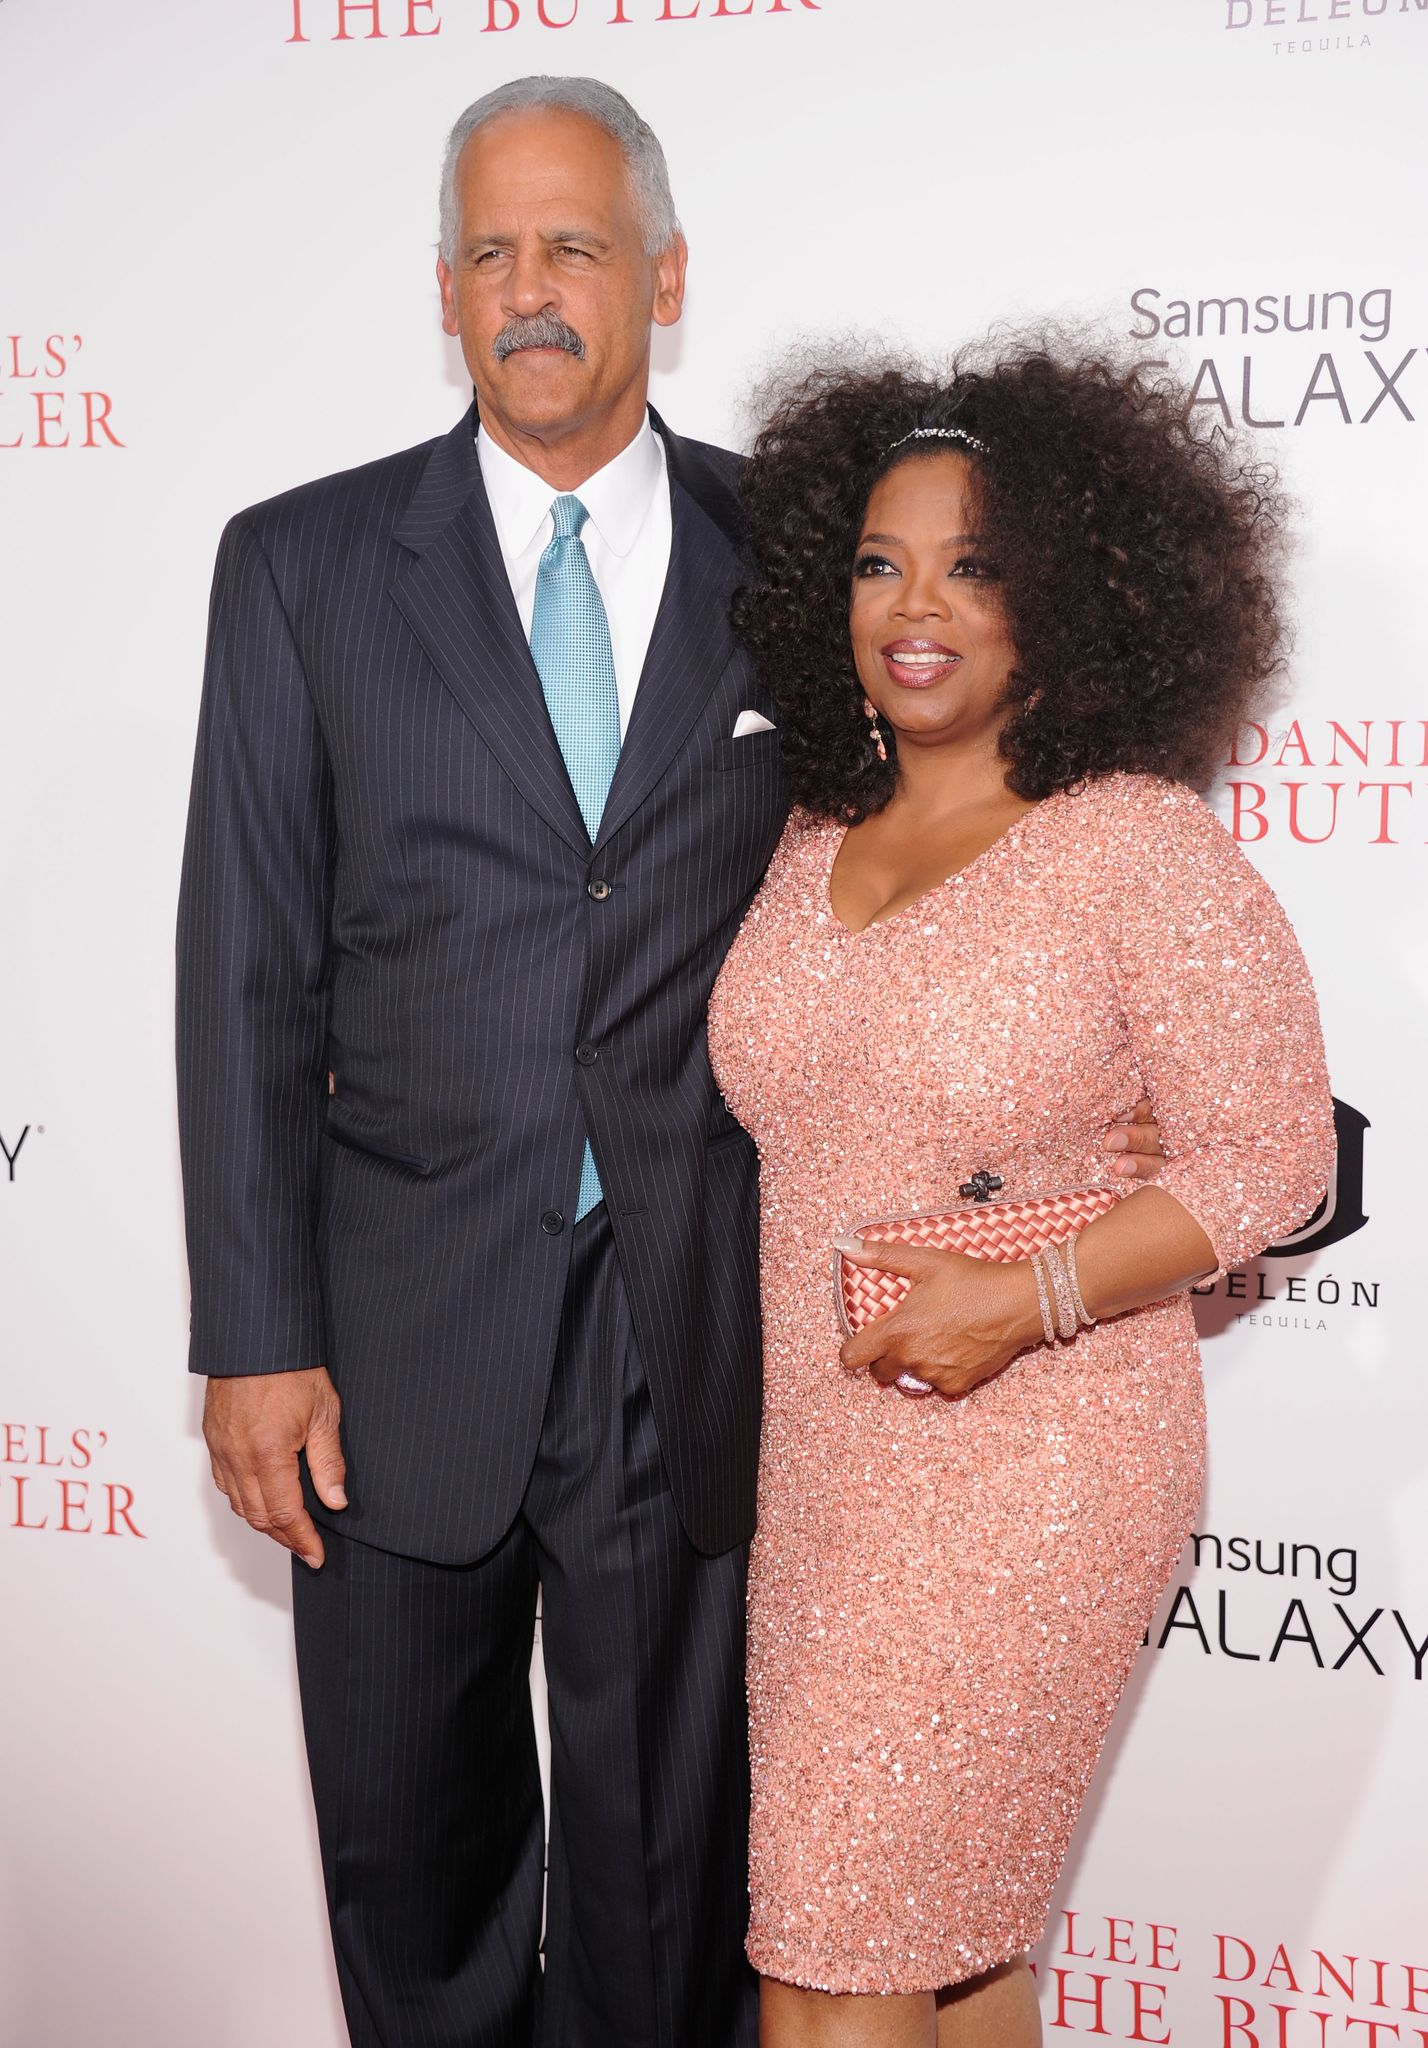 Stedman Graham and Oprah Winfrey arrive on the red carpet for the premiere of  "The Butler" on August 5, 2013 | Source: Getty Images